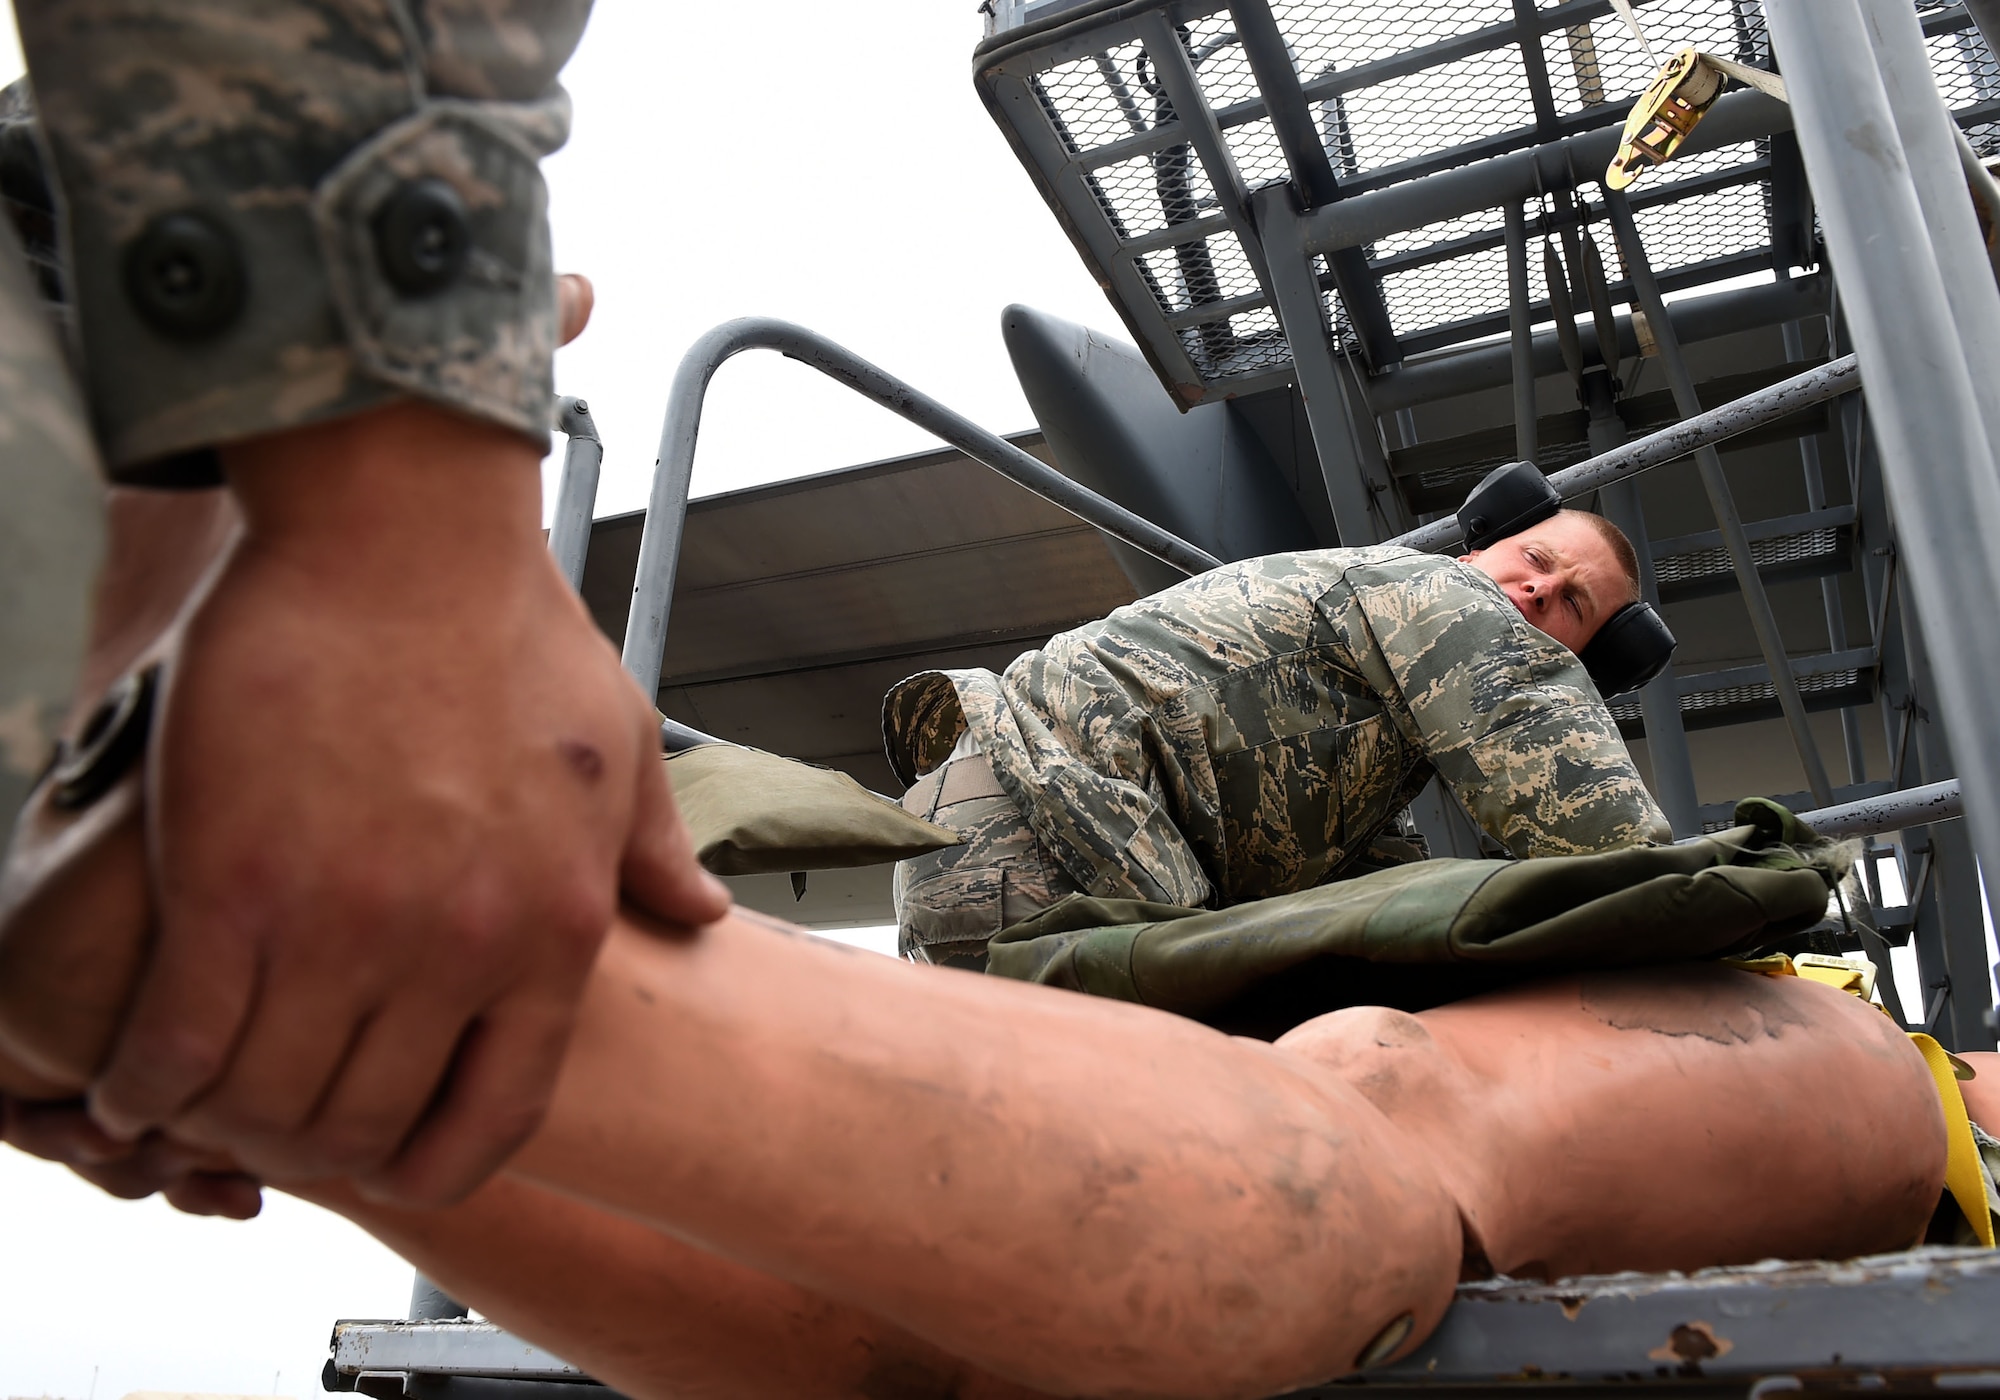 Airman 1st Class Garrett Teegestrom, 5th Expeditionary Aircraft Maintenance Squadron C-17 instruments and flight control systems technician, tends to a mock casualty during a fall protection exercise on the flightline at an undisclosed location in Southwest Asia, March 14, 2016. A fall protection plan is required at any work site where there is a potential for a member to fall from a high elevation. (U.S. Air Force photo by Staff Sgt. Jerilyn Quintanilla)